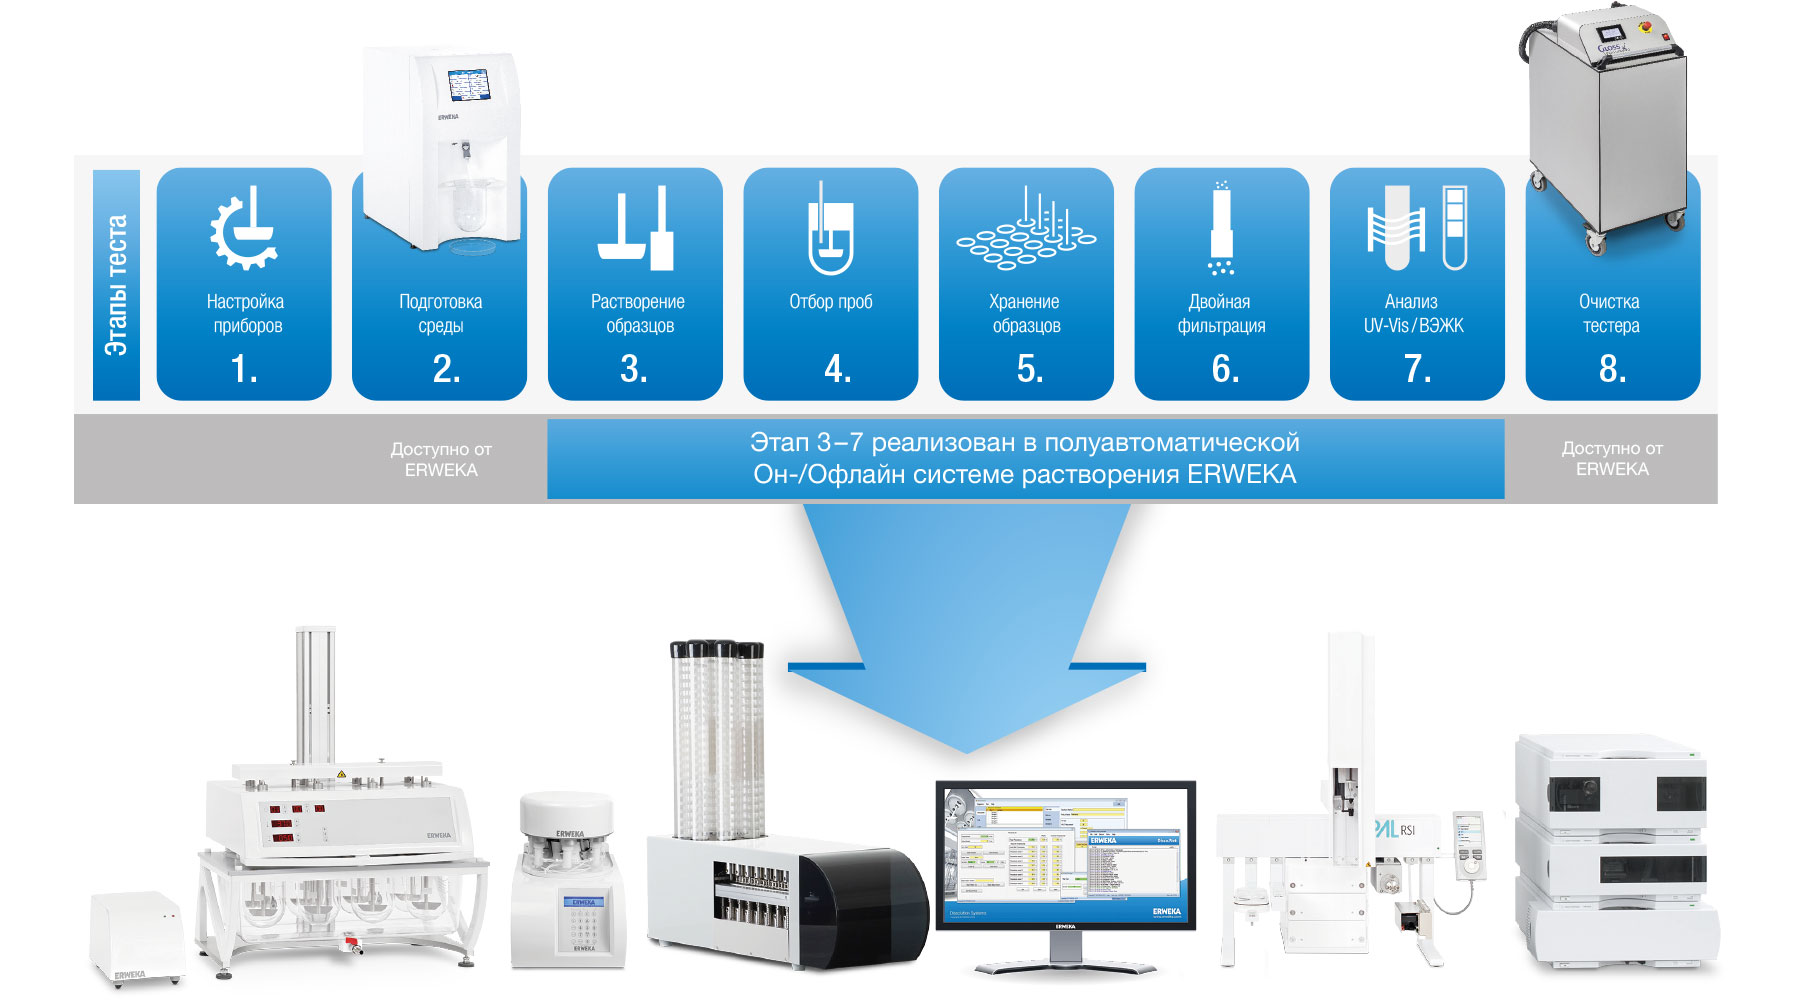 Semi-automated dissolution system with HPLC analysis